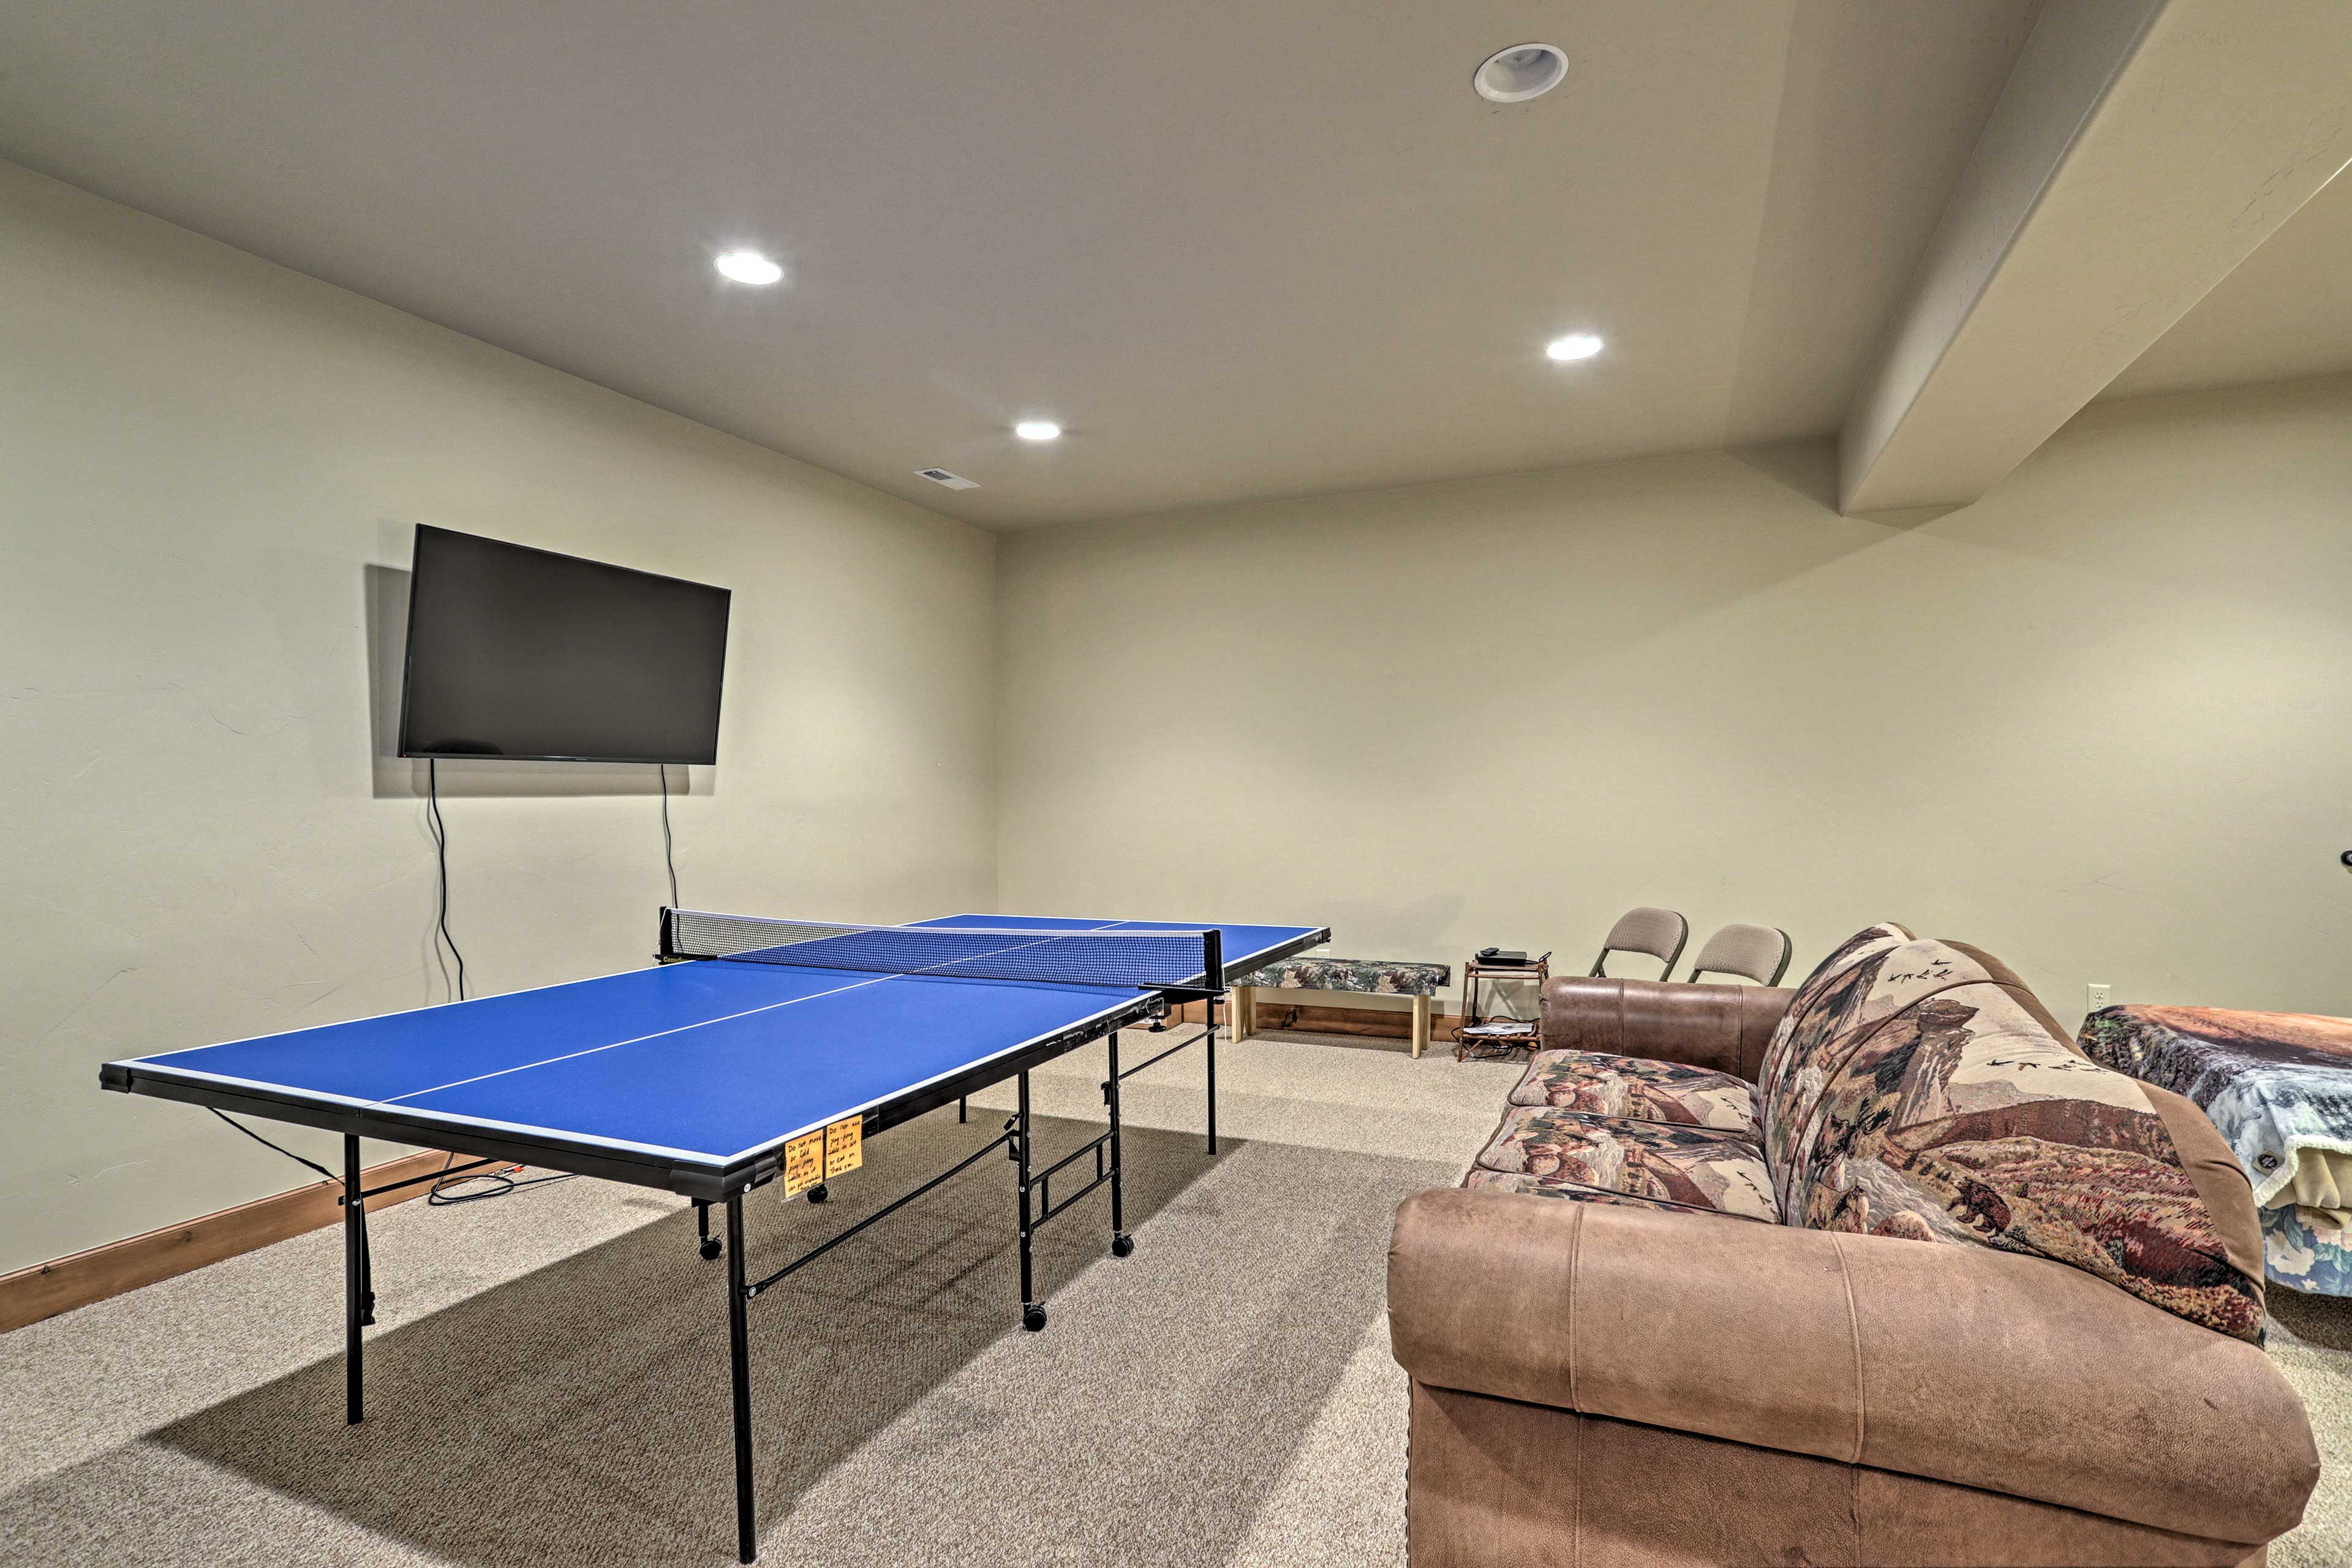 Host a ping pong tournament down in the game room!